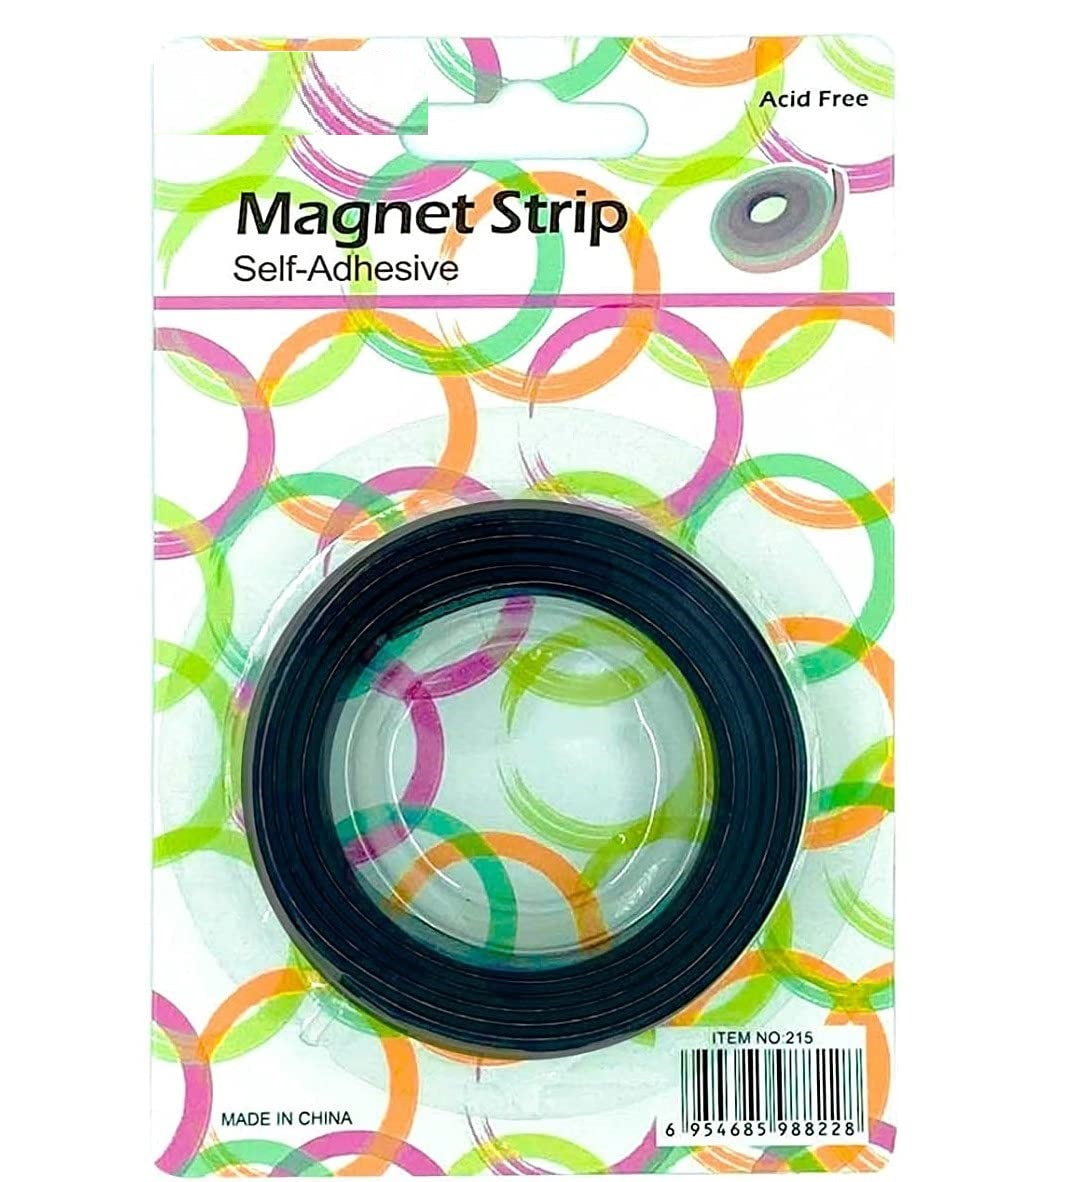 SkyShopy Self Adhesive Flexible Magnetic Tape 2cm x 1m with Adhesive Backing, Used for Crafts